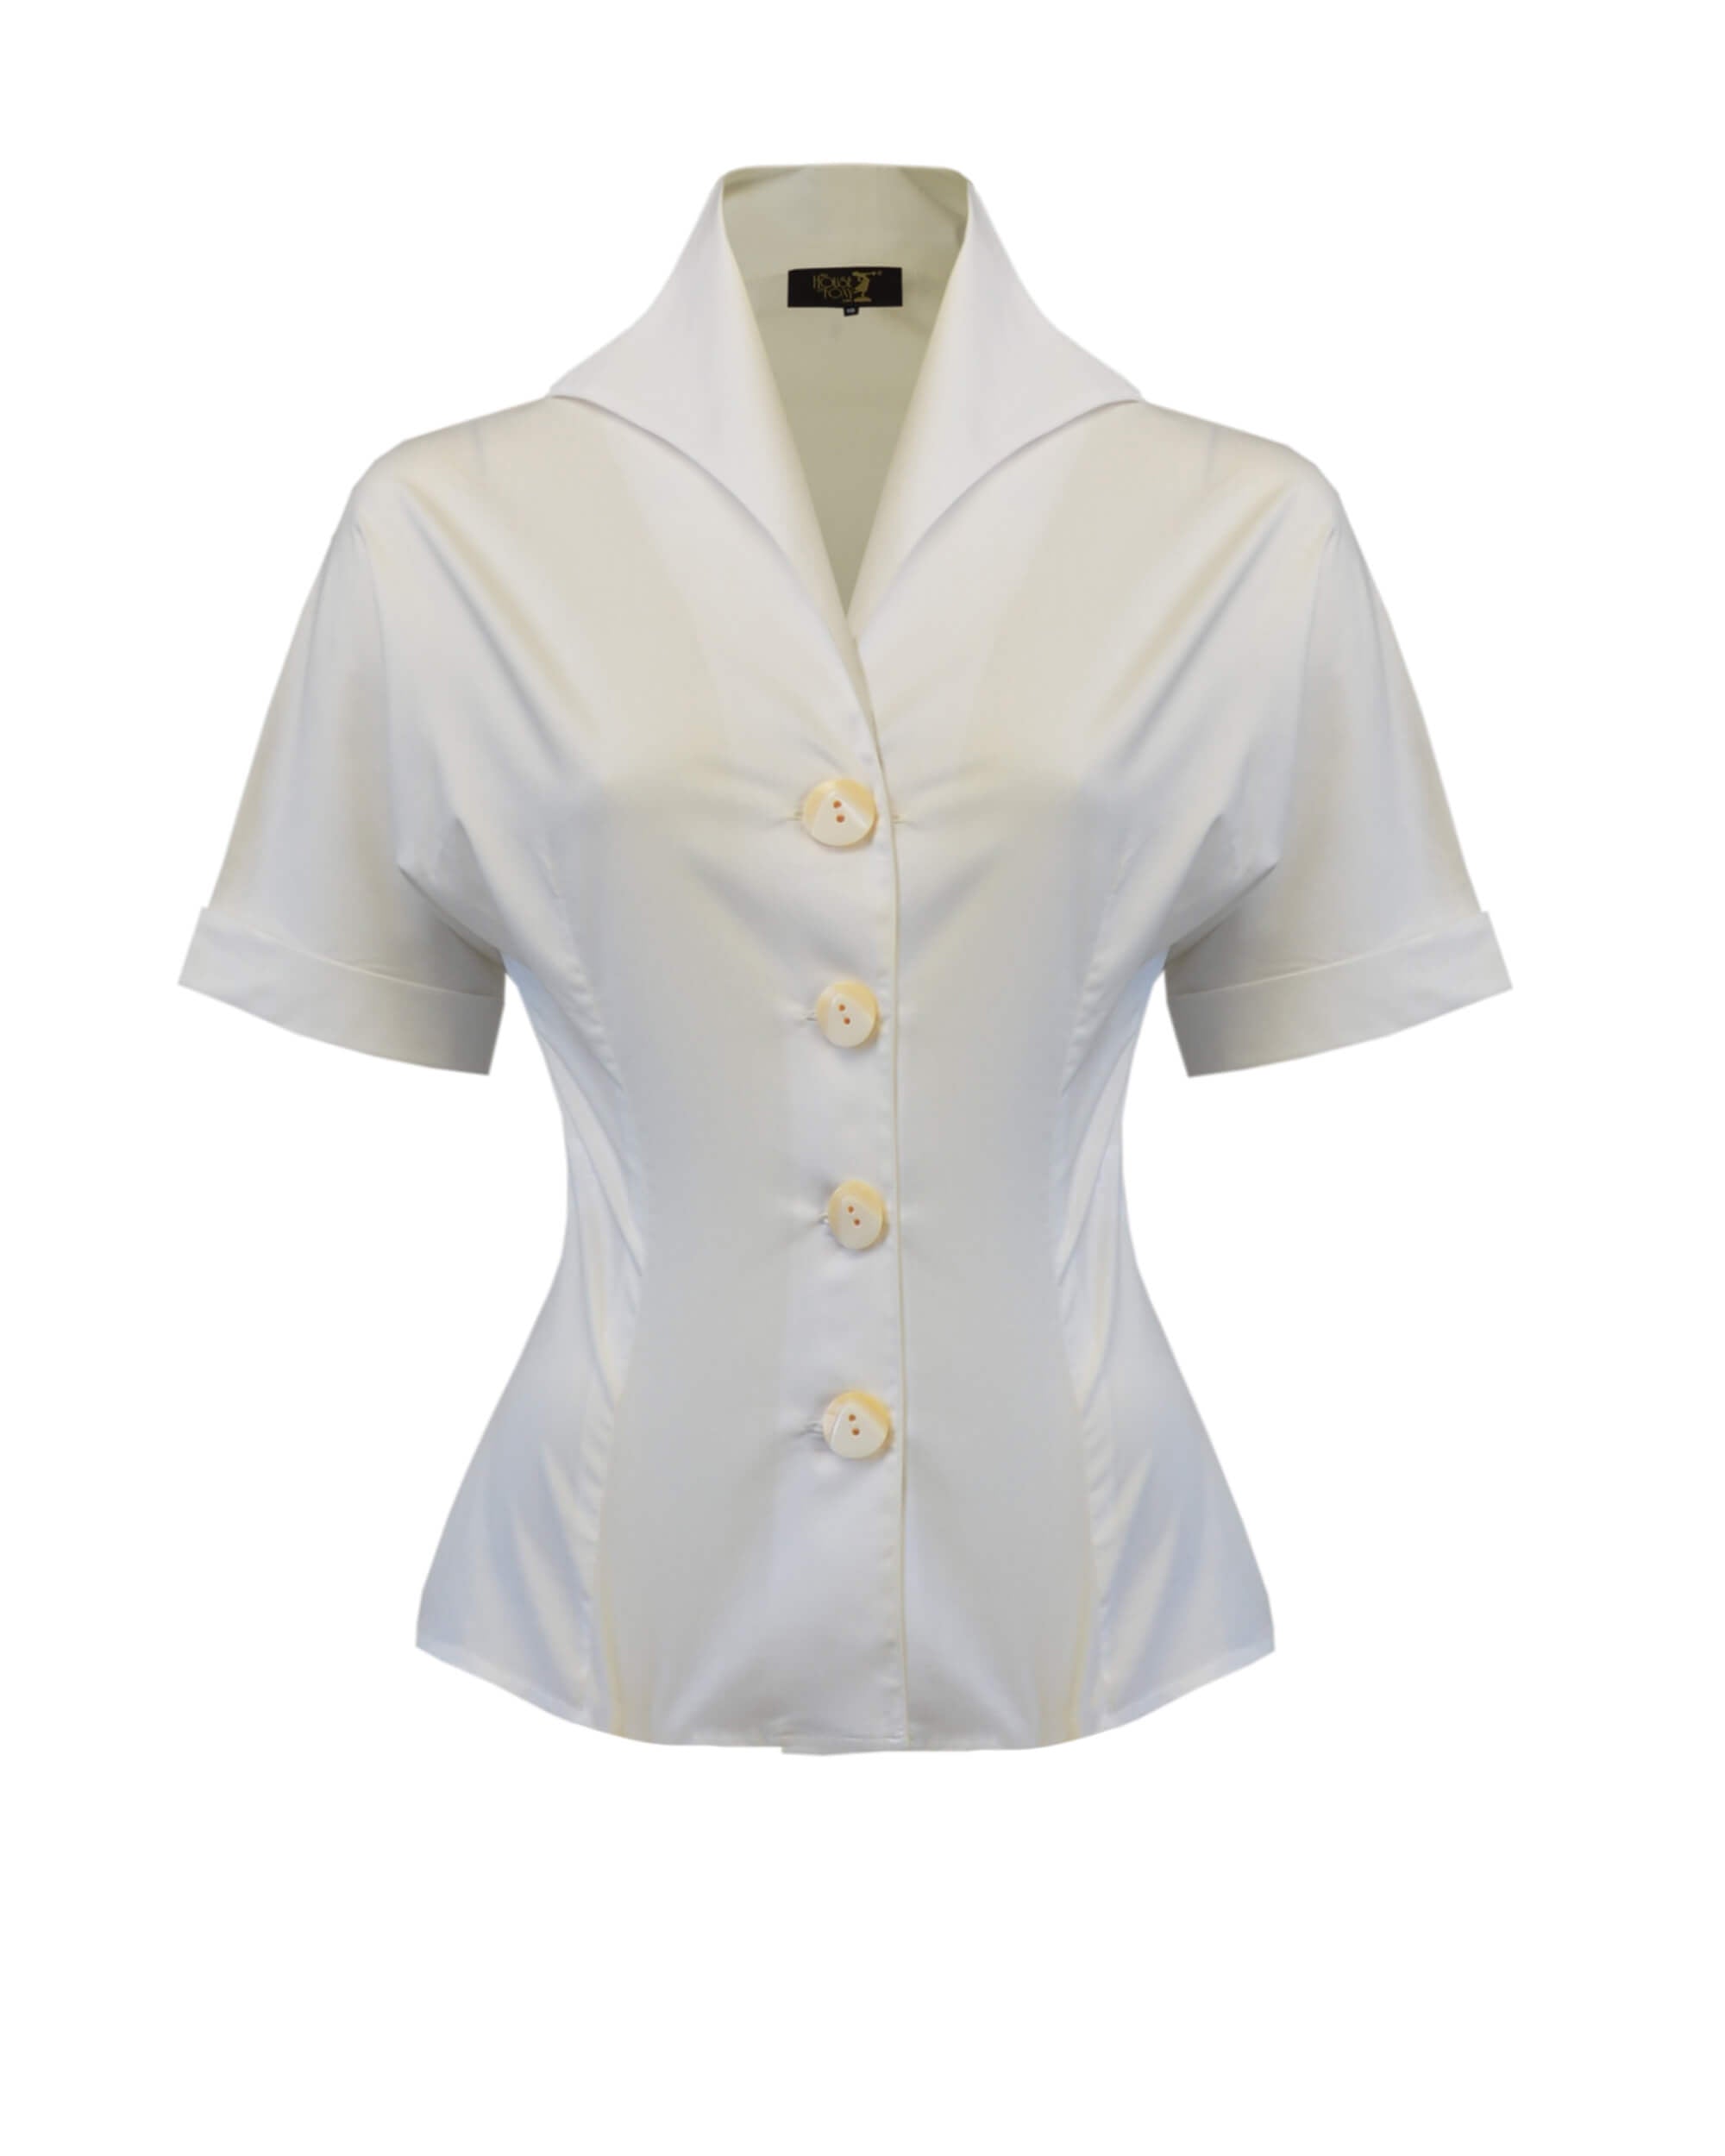 50s Norma Jean Blouse - Ivory